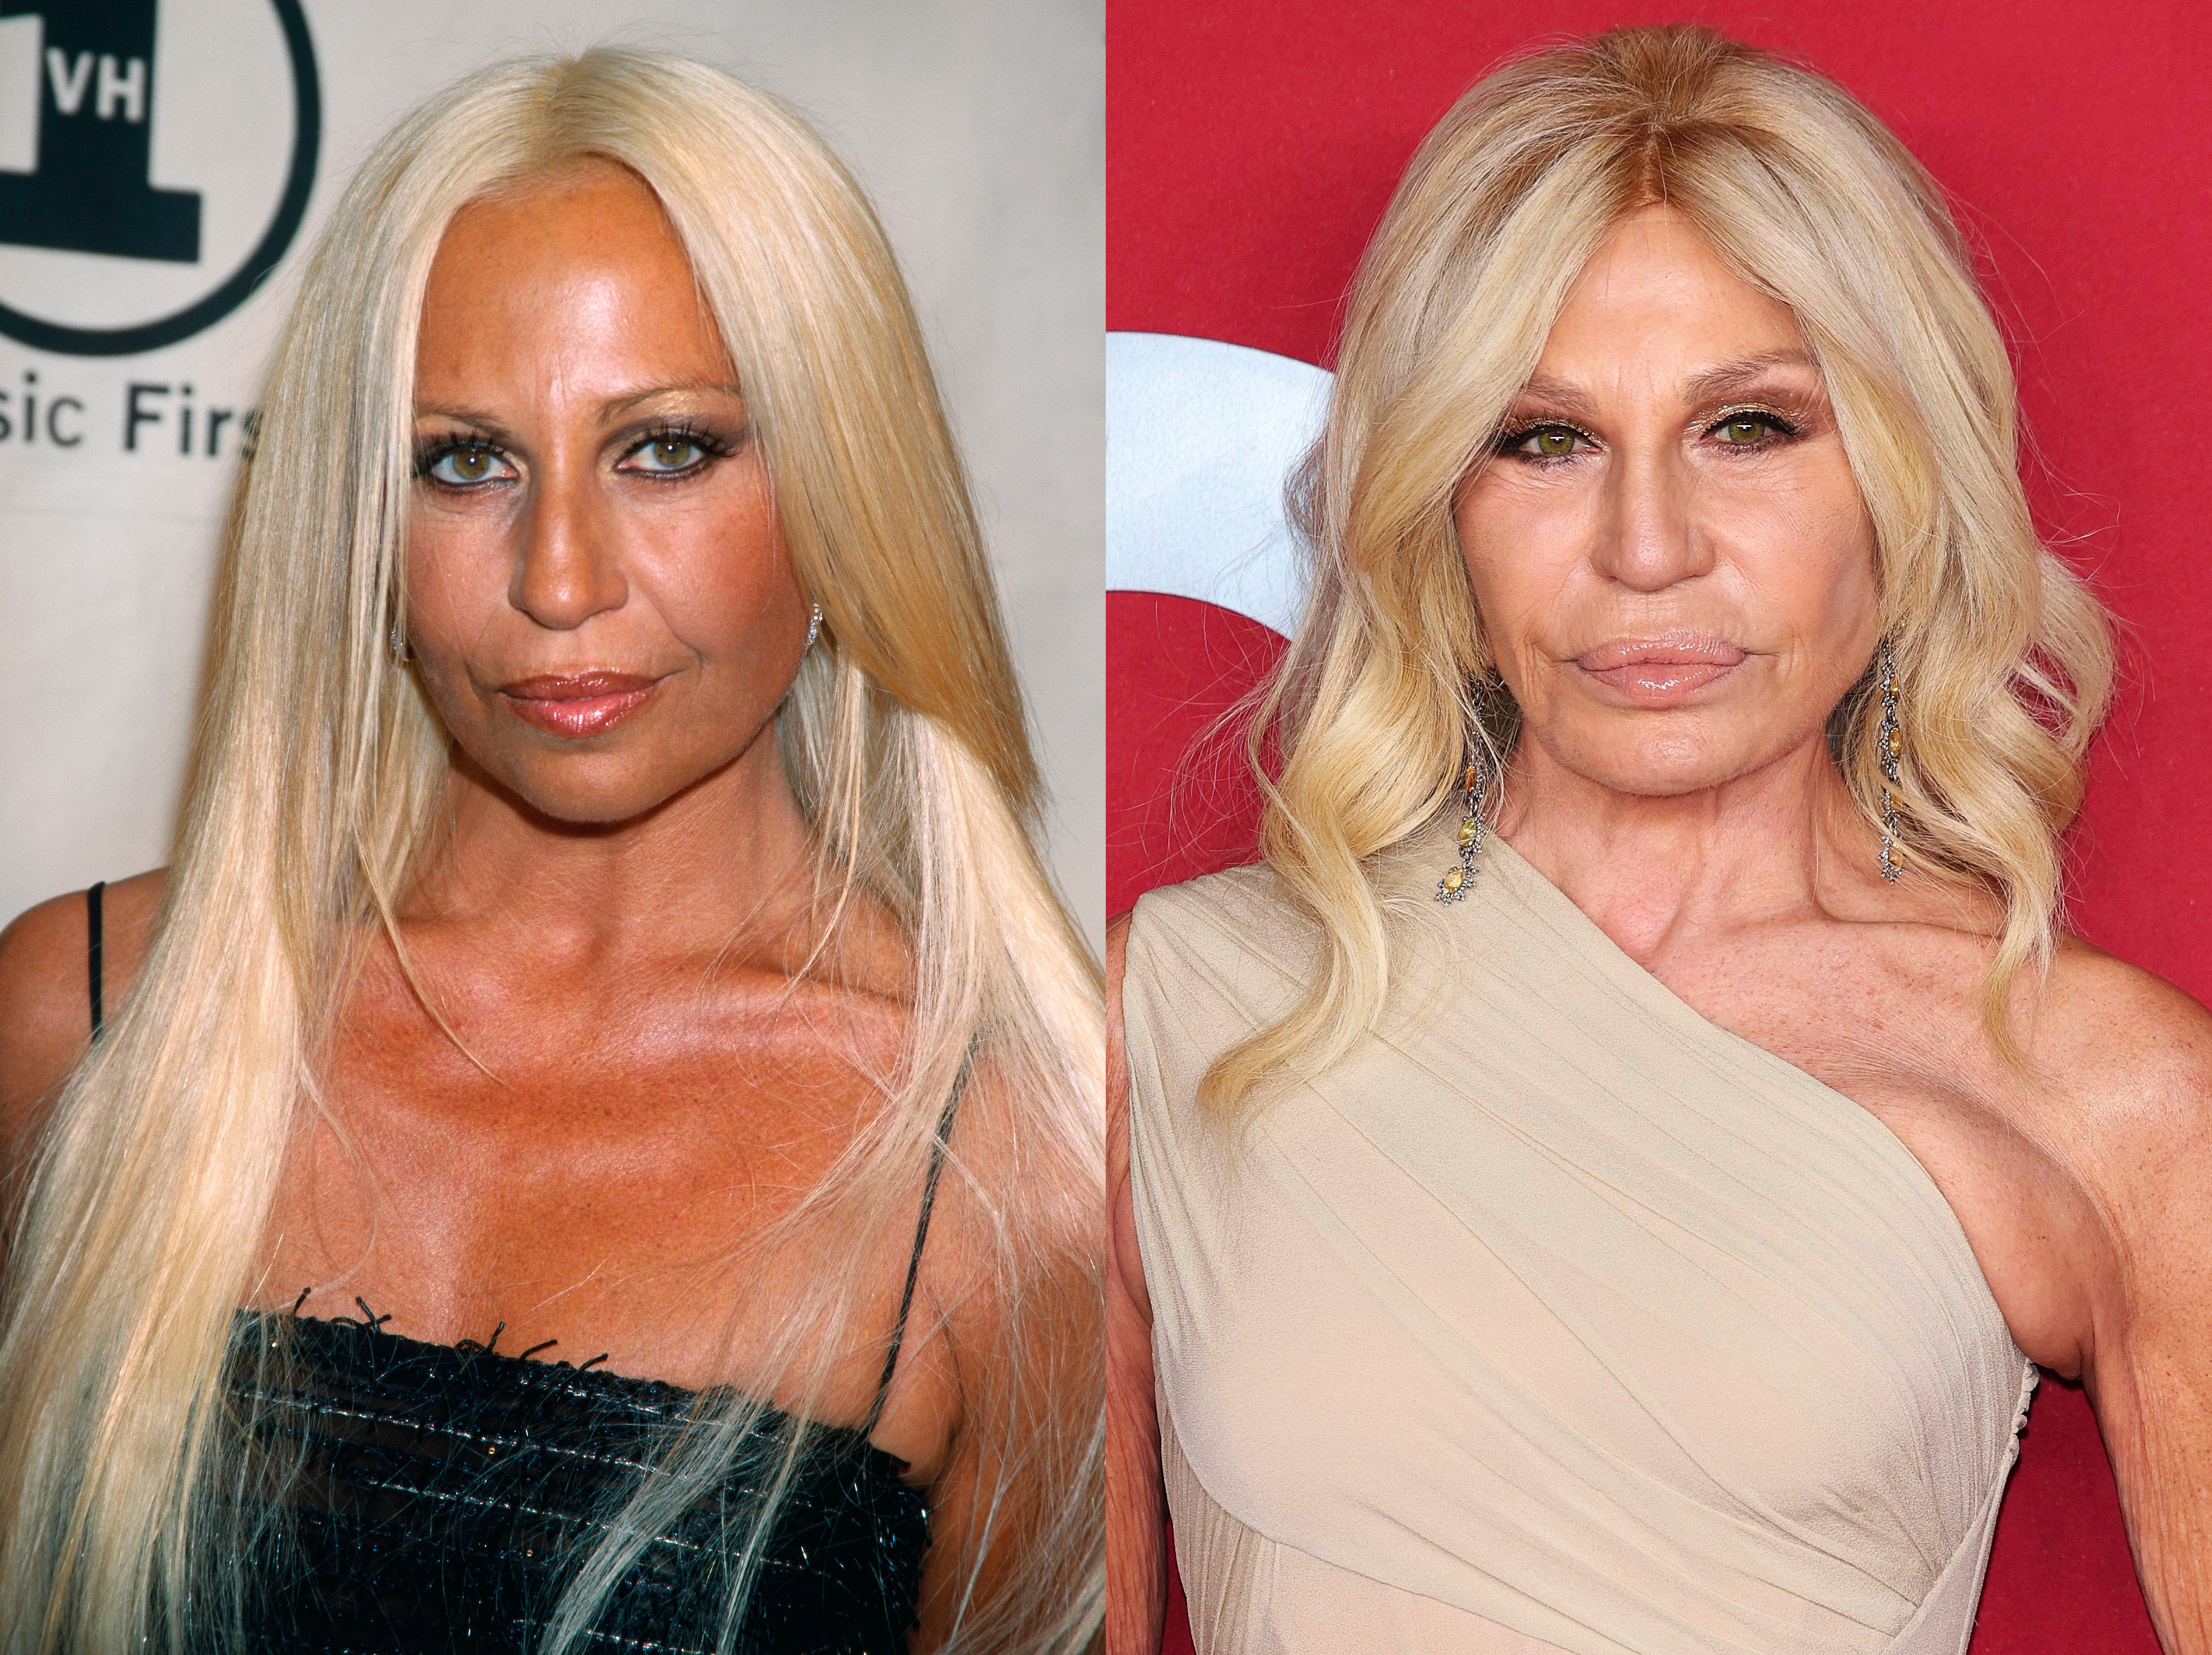 Donatella Versace in 1999 vs 2023 | Source: Getty Images